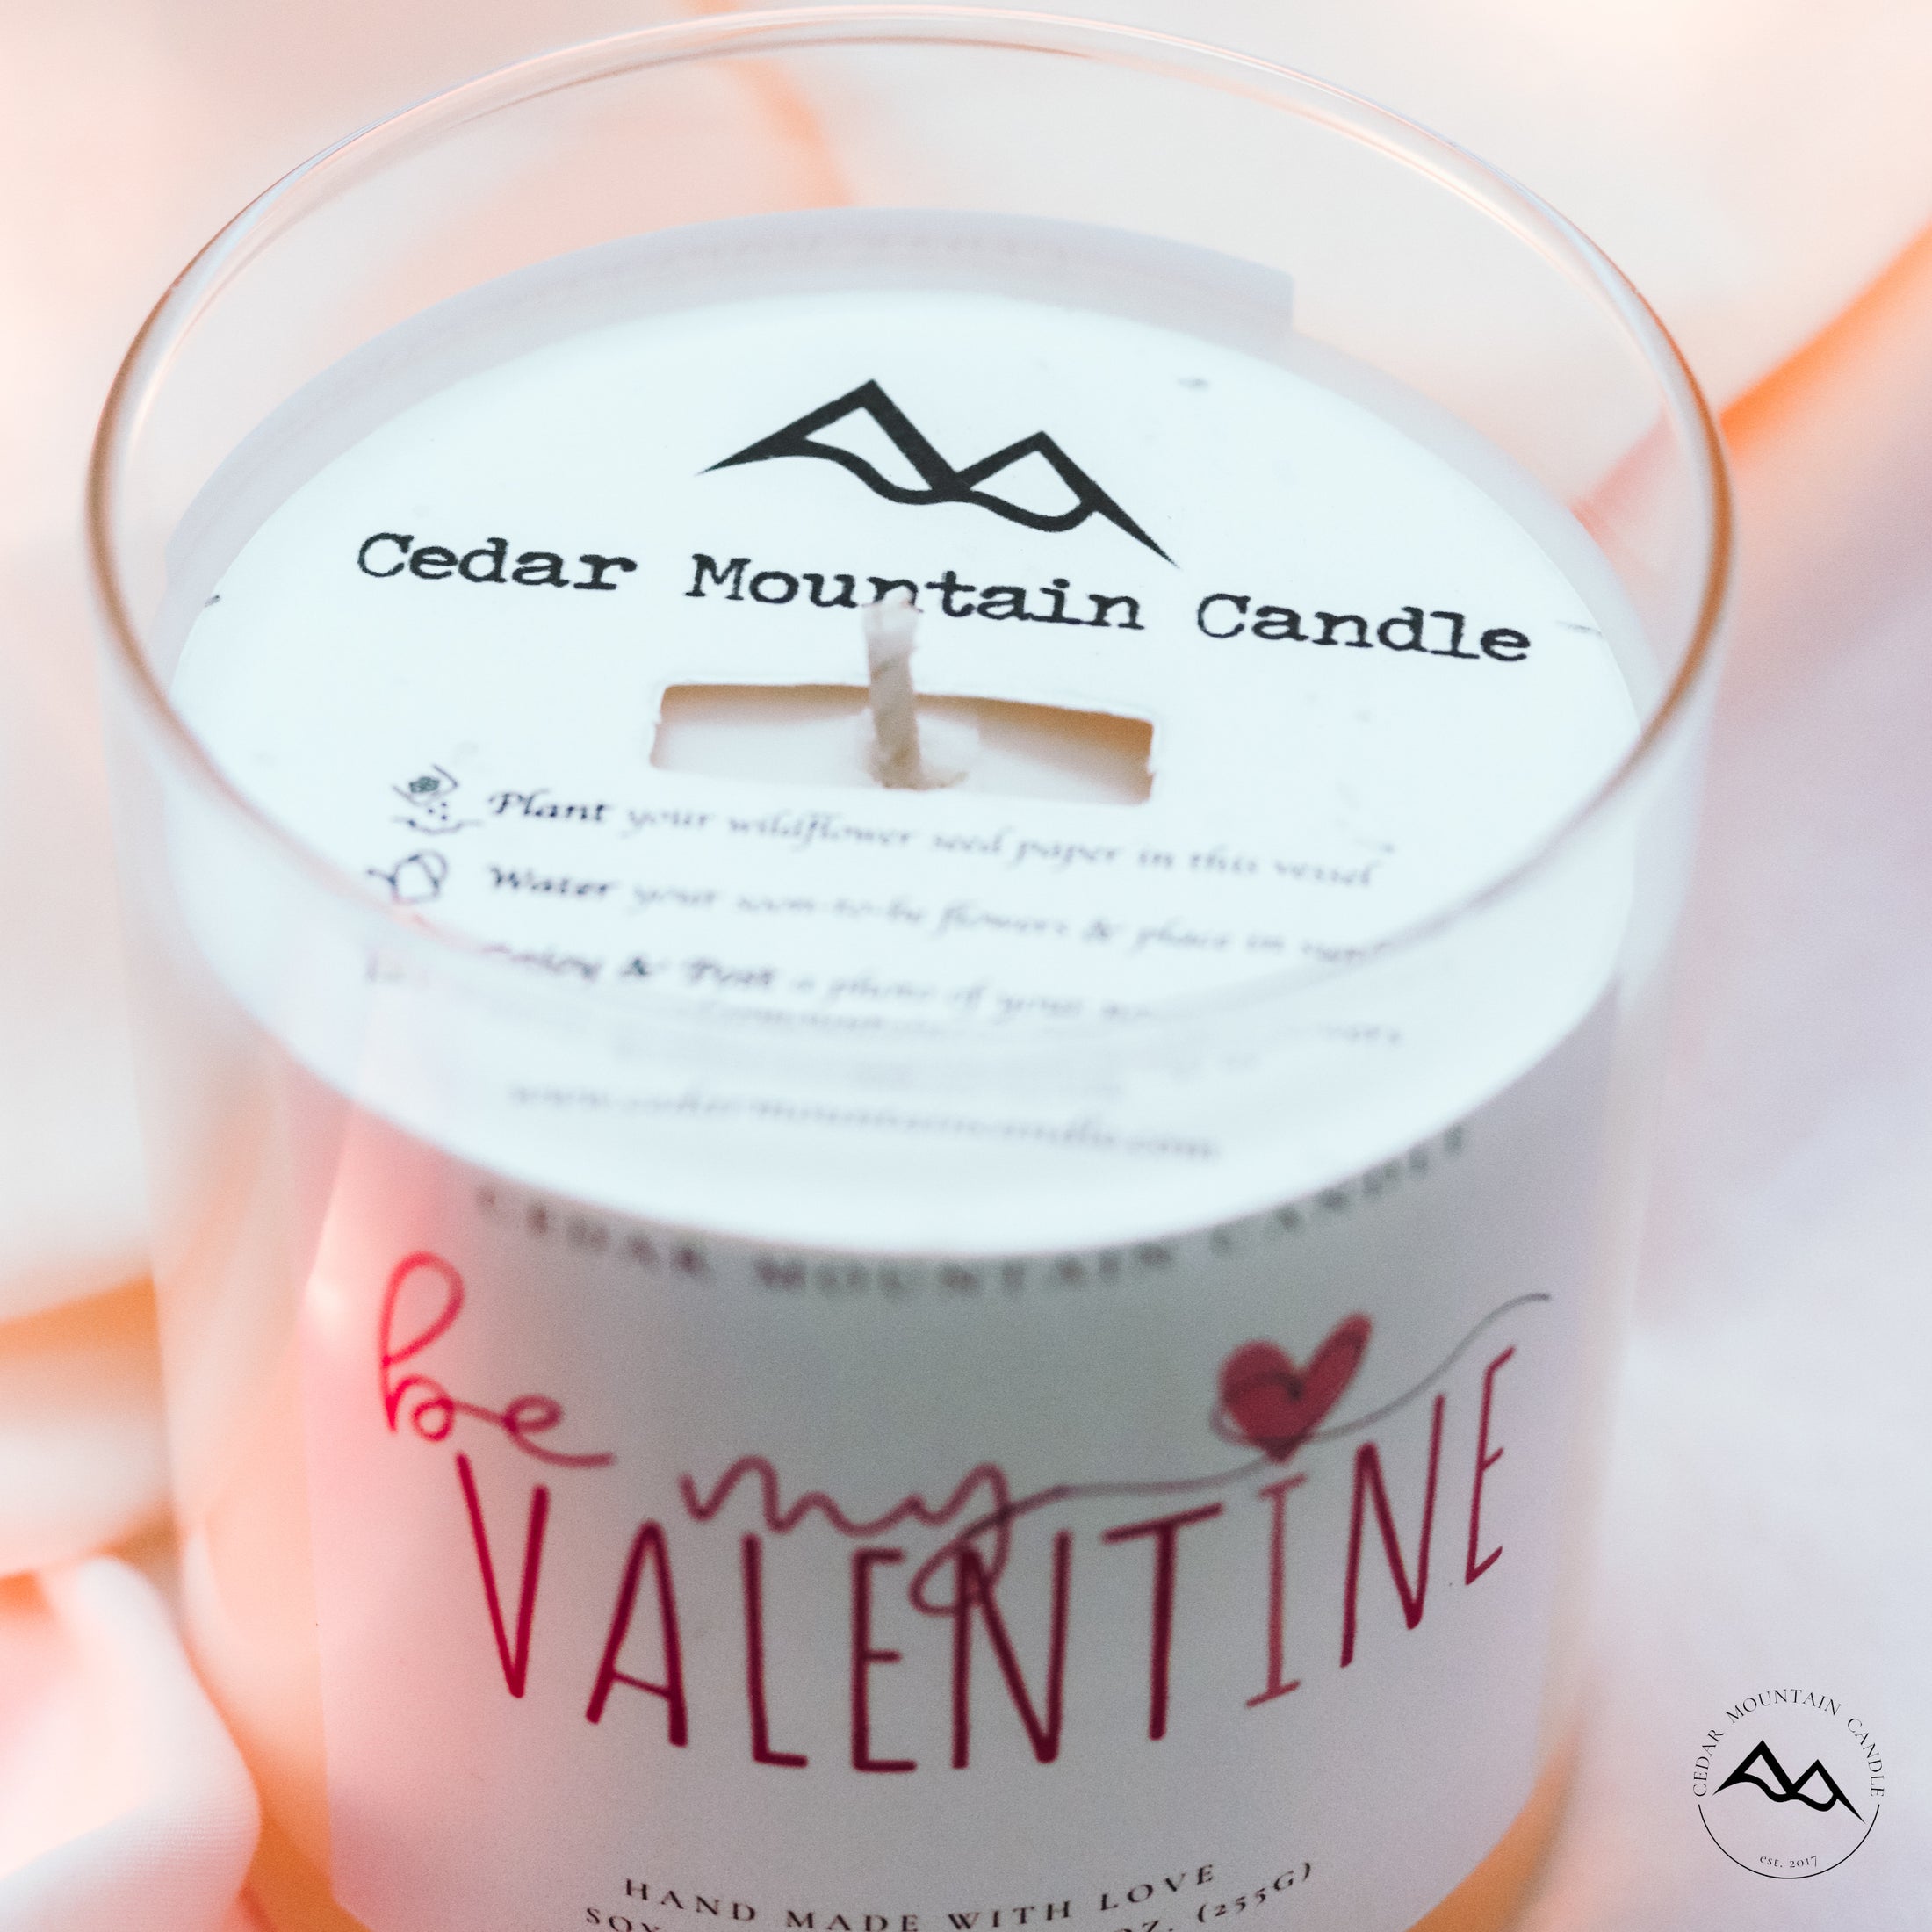 "You can live without.." Galentine's Day 9 oz Whiskey Glass Jar Soy Candle - Choose Your Scent